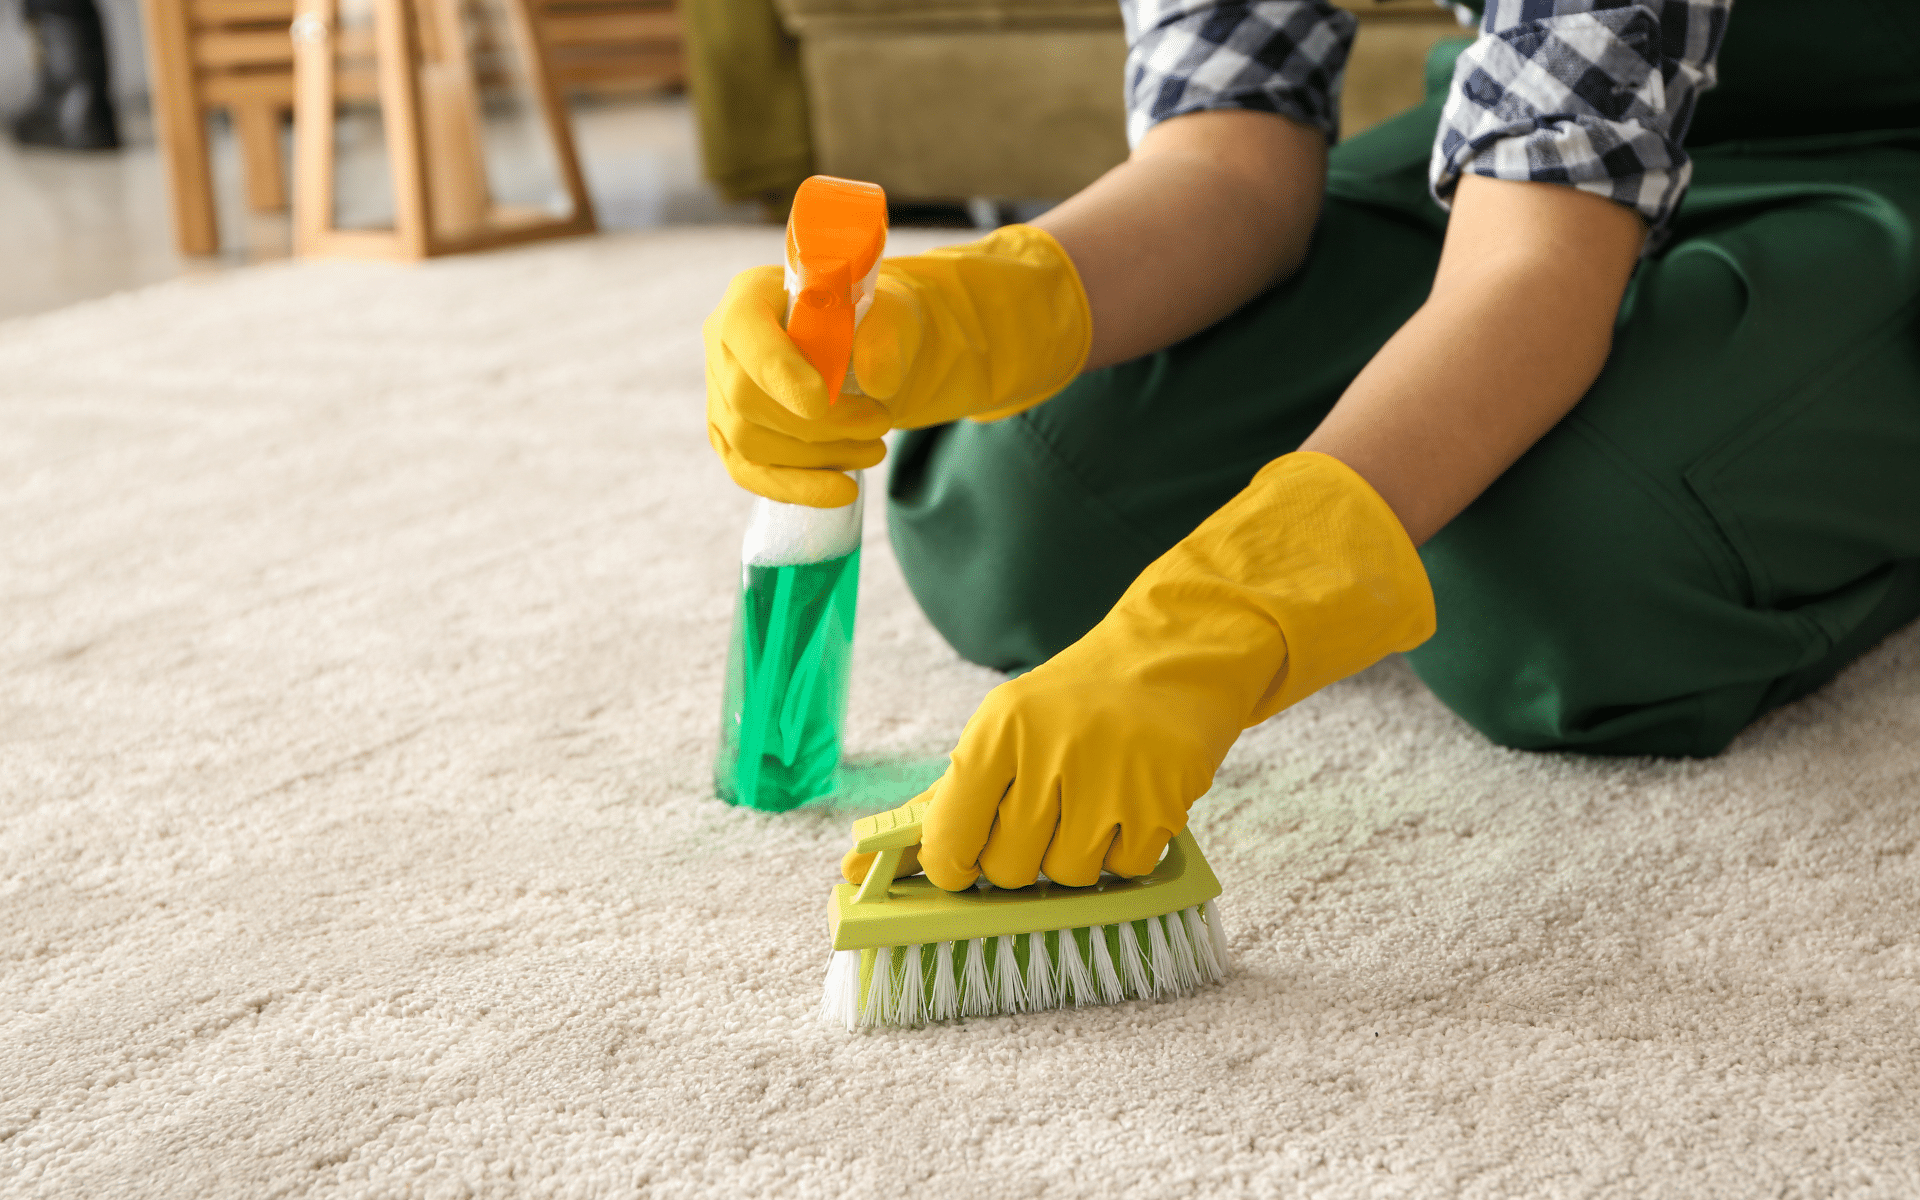 Carpet cleaning using brush and liquid cleaning material